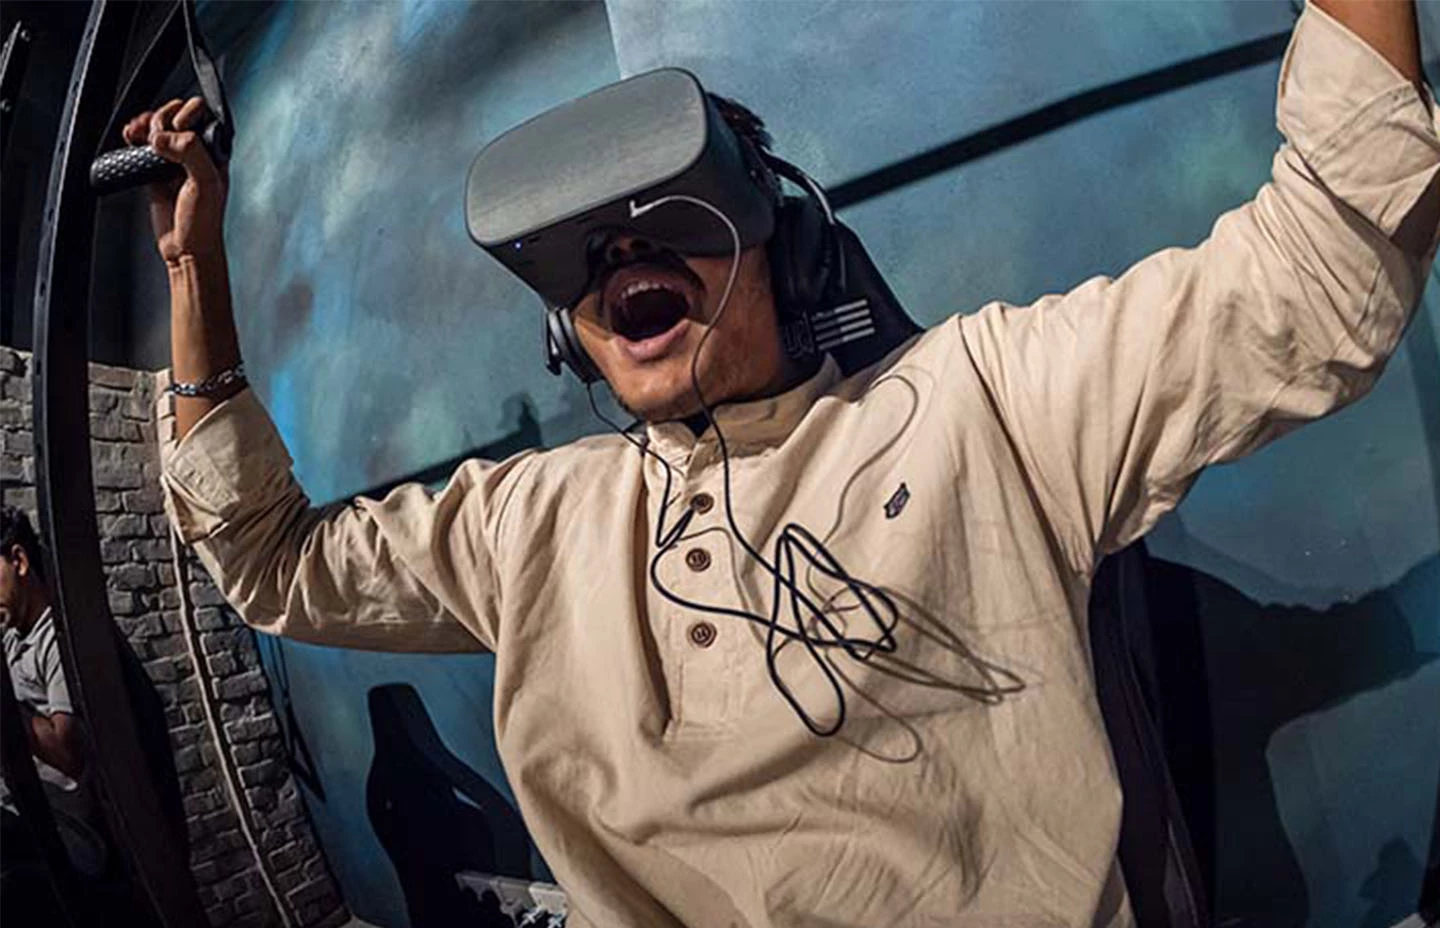 Man with open mouth sat on VR paraglider experience wearing a VR headset